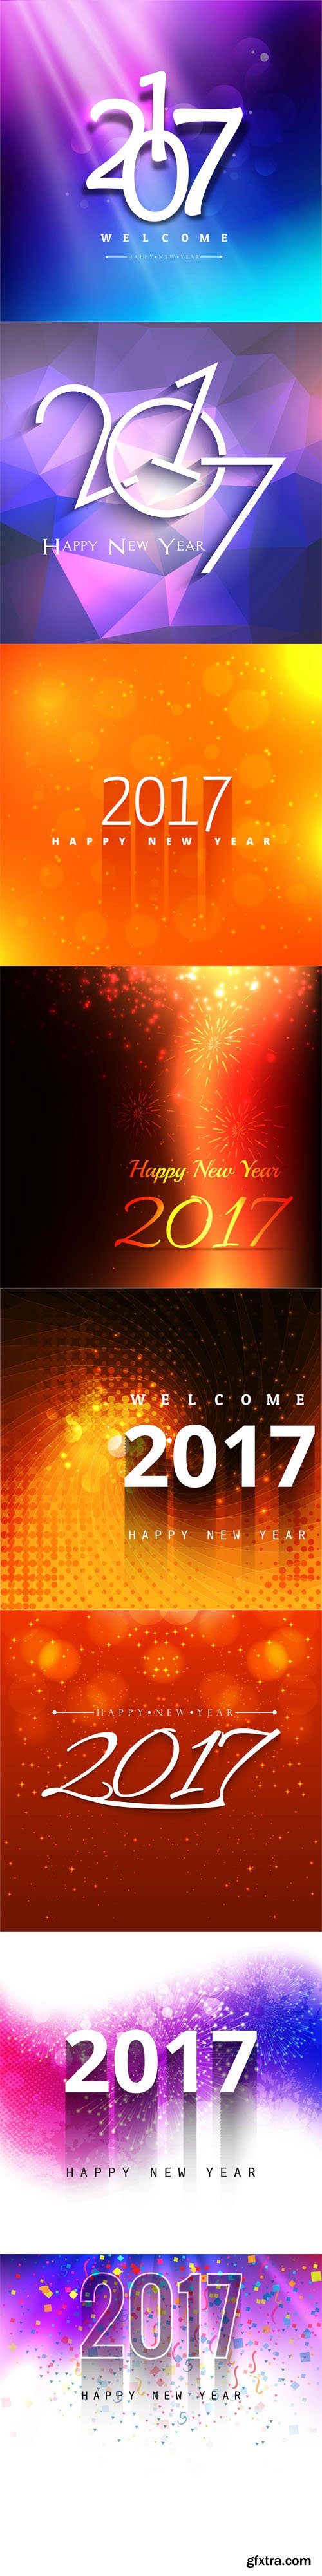 New Year 2017 Vector Backgrounds Vol.4